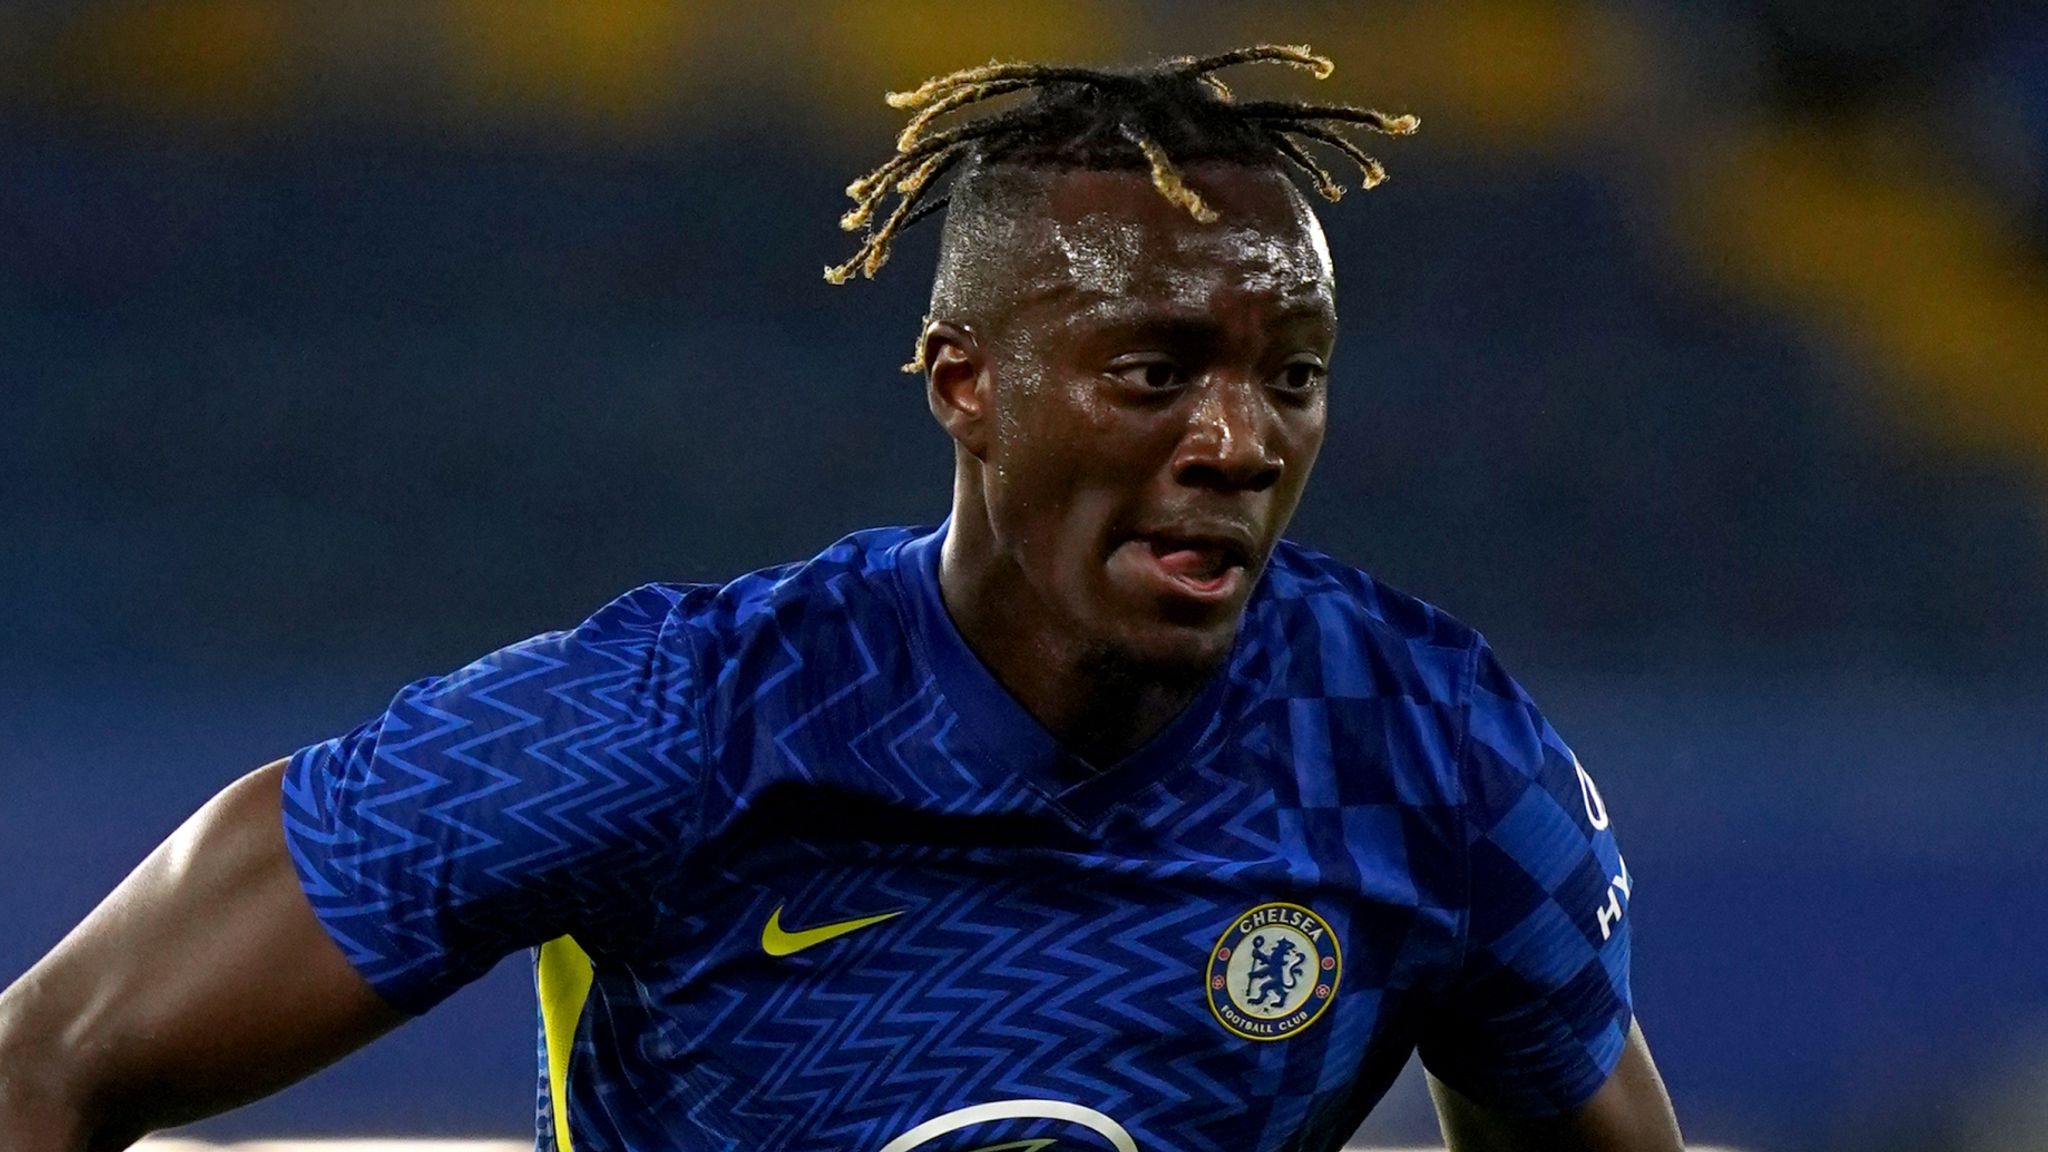 Football news - Tammy Abraham joins Serie A club Roma from Chelsea